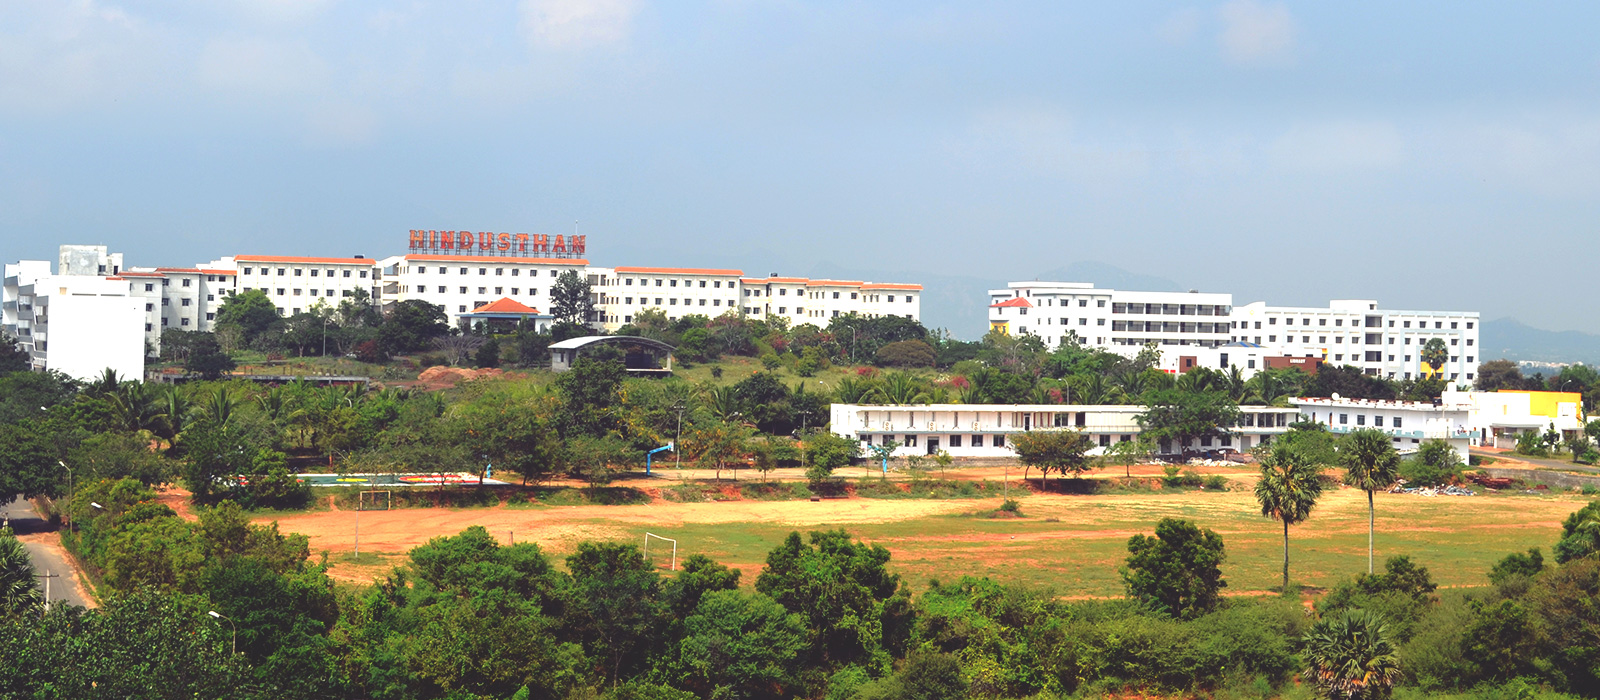 Hindusthan College of Engineering and Technology, Coimbatore Image